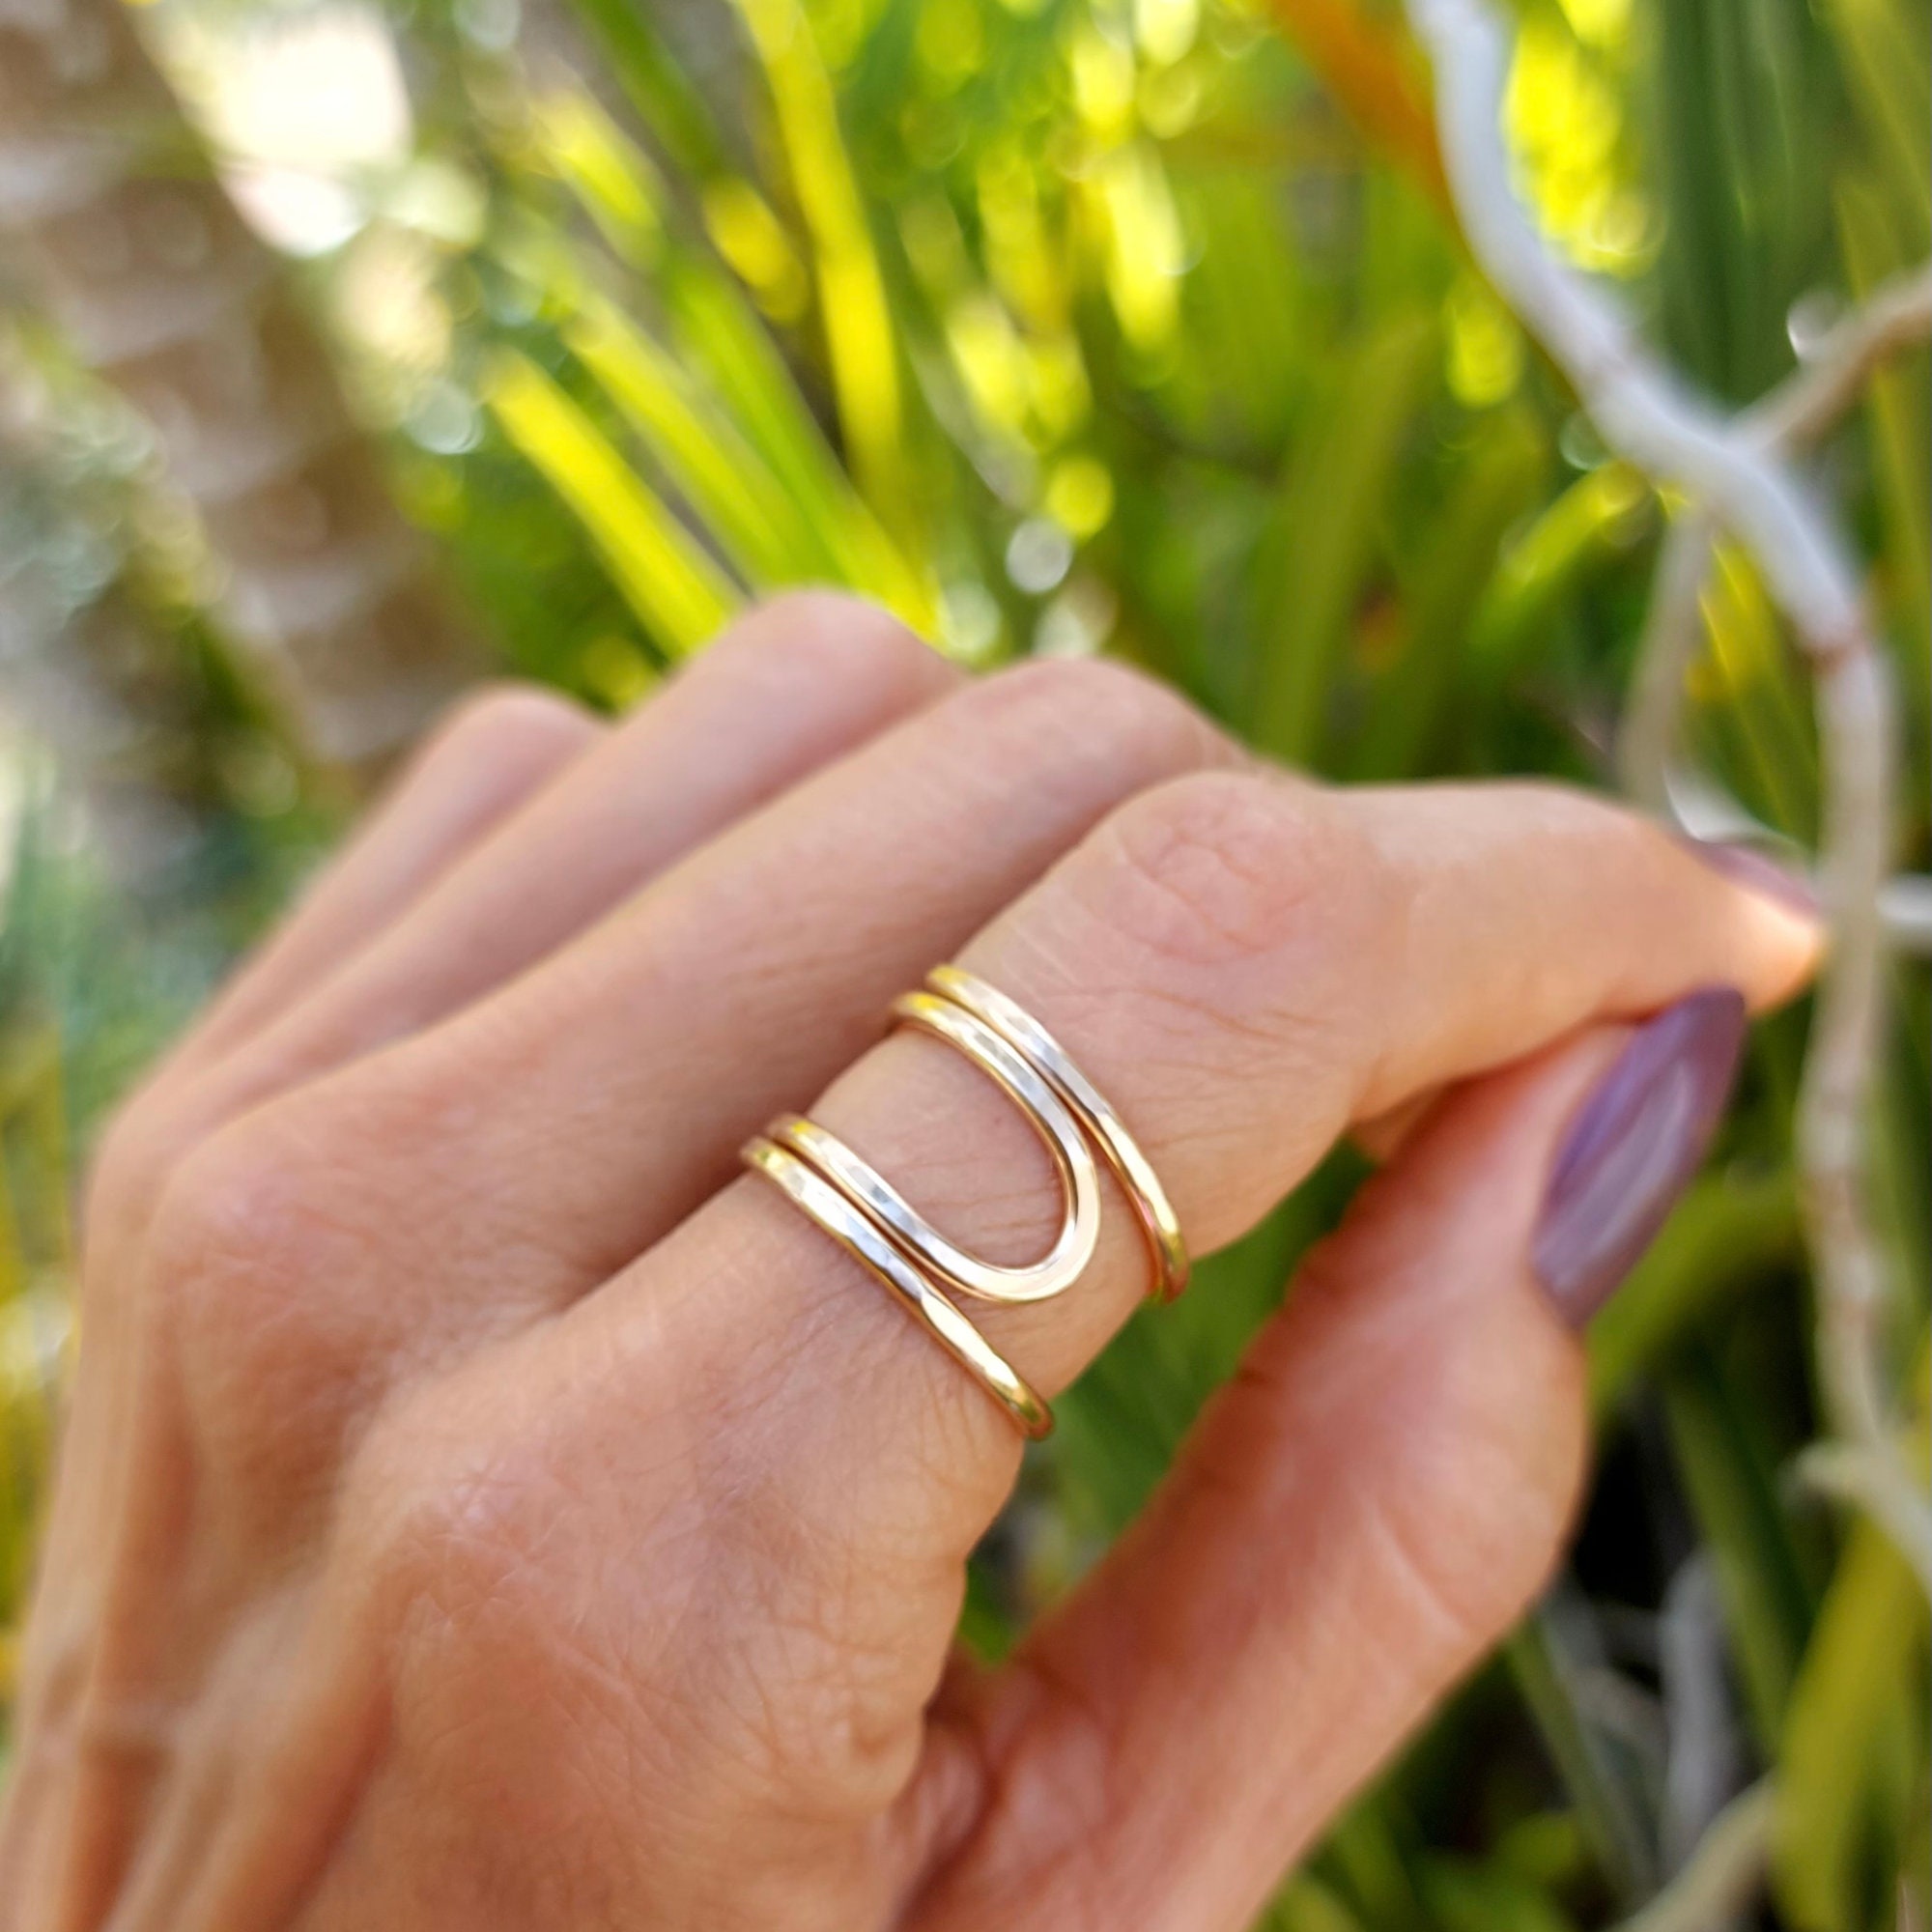 Index Finger Ring for Women/handmade Jewelry/gifts for Her/sterling Silver  or Gold-filled - Etsy